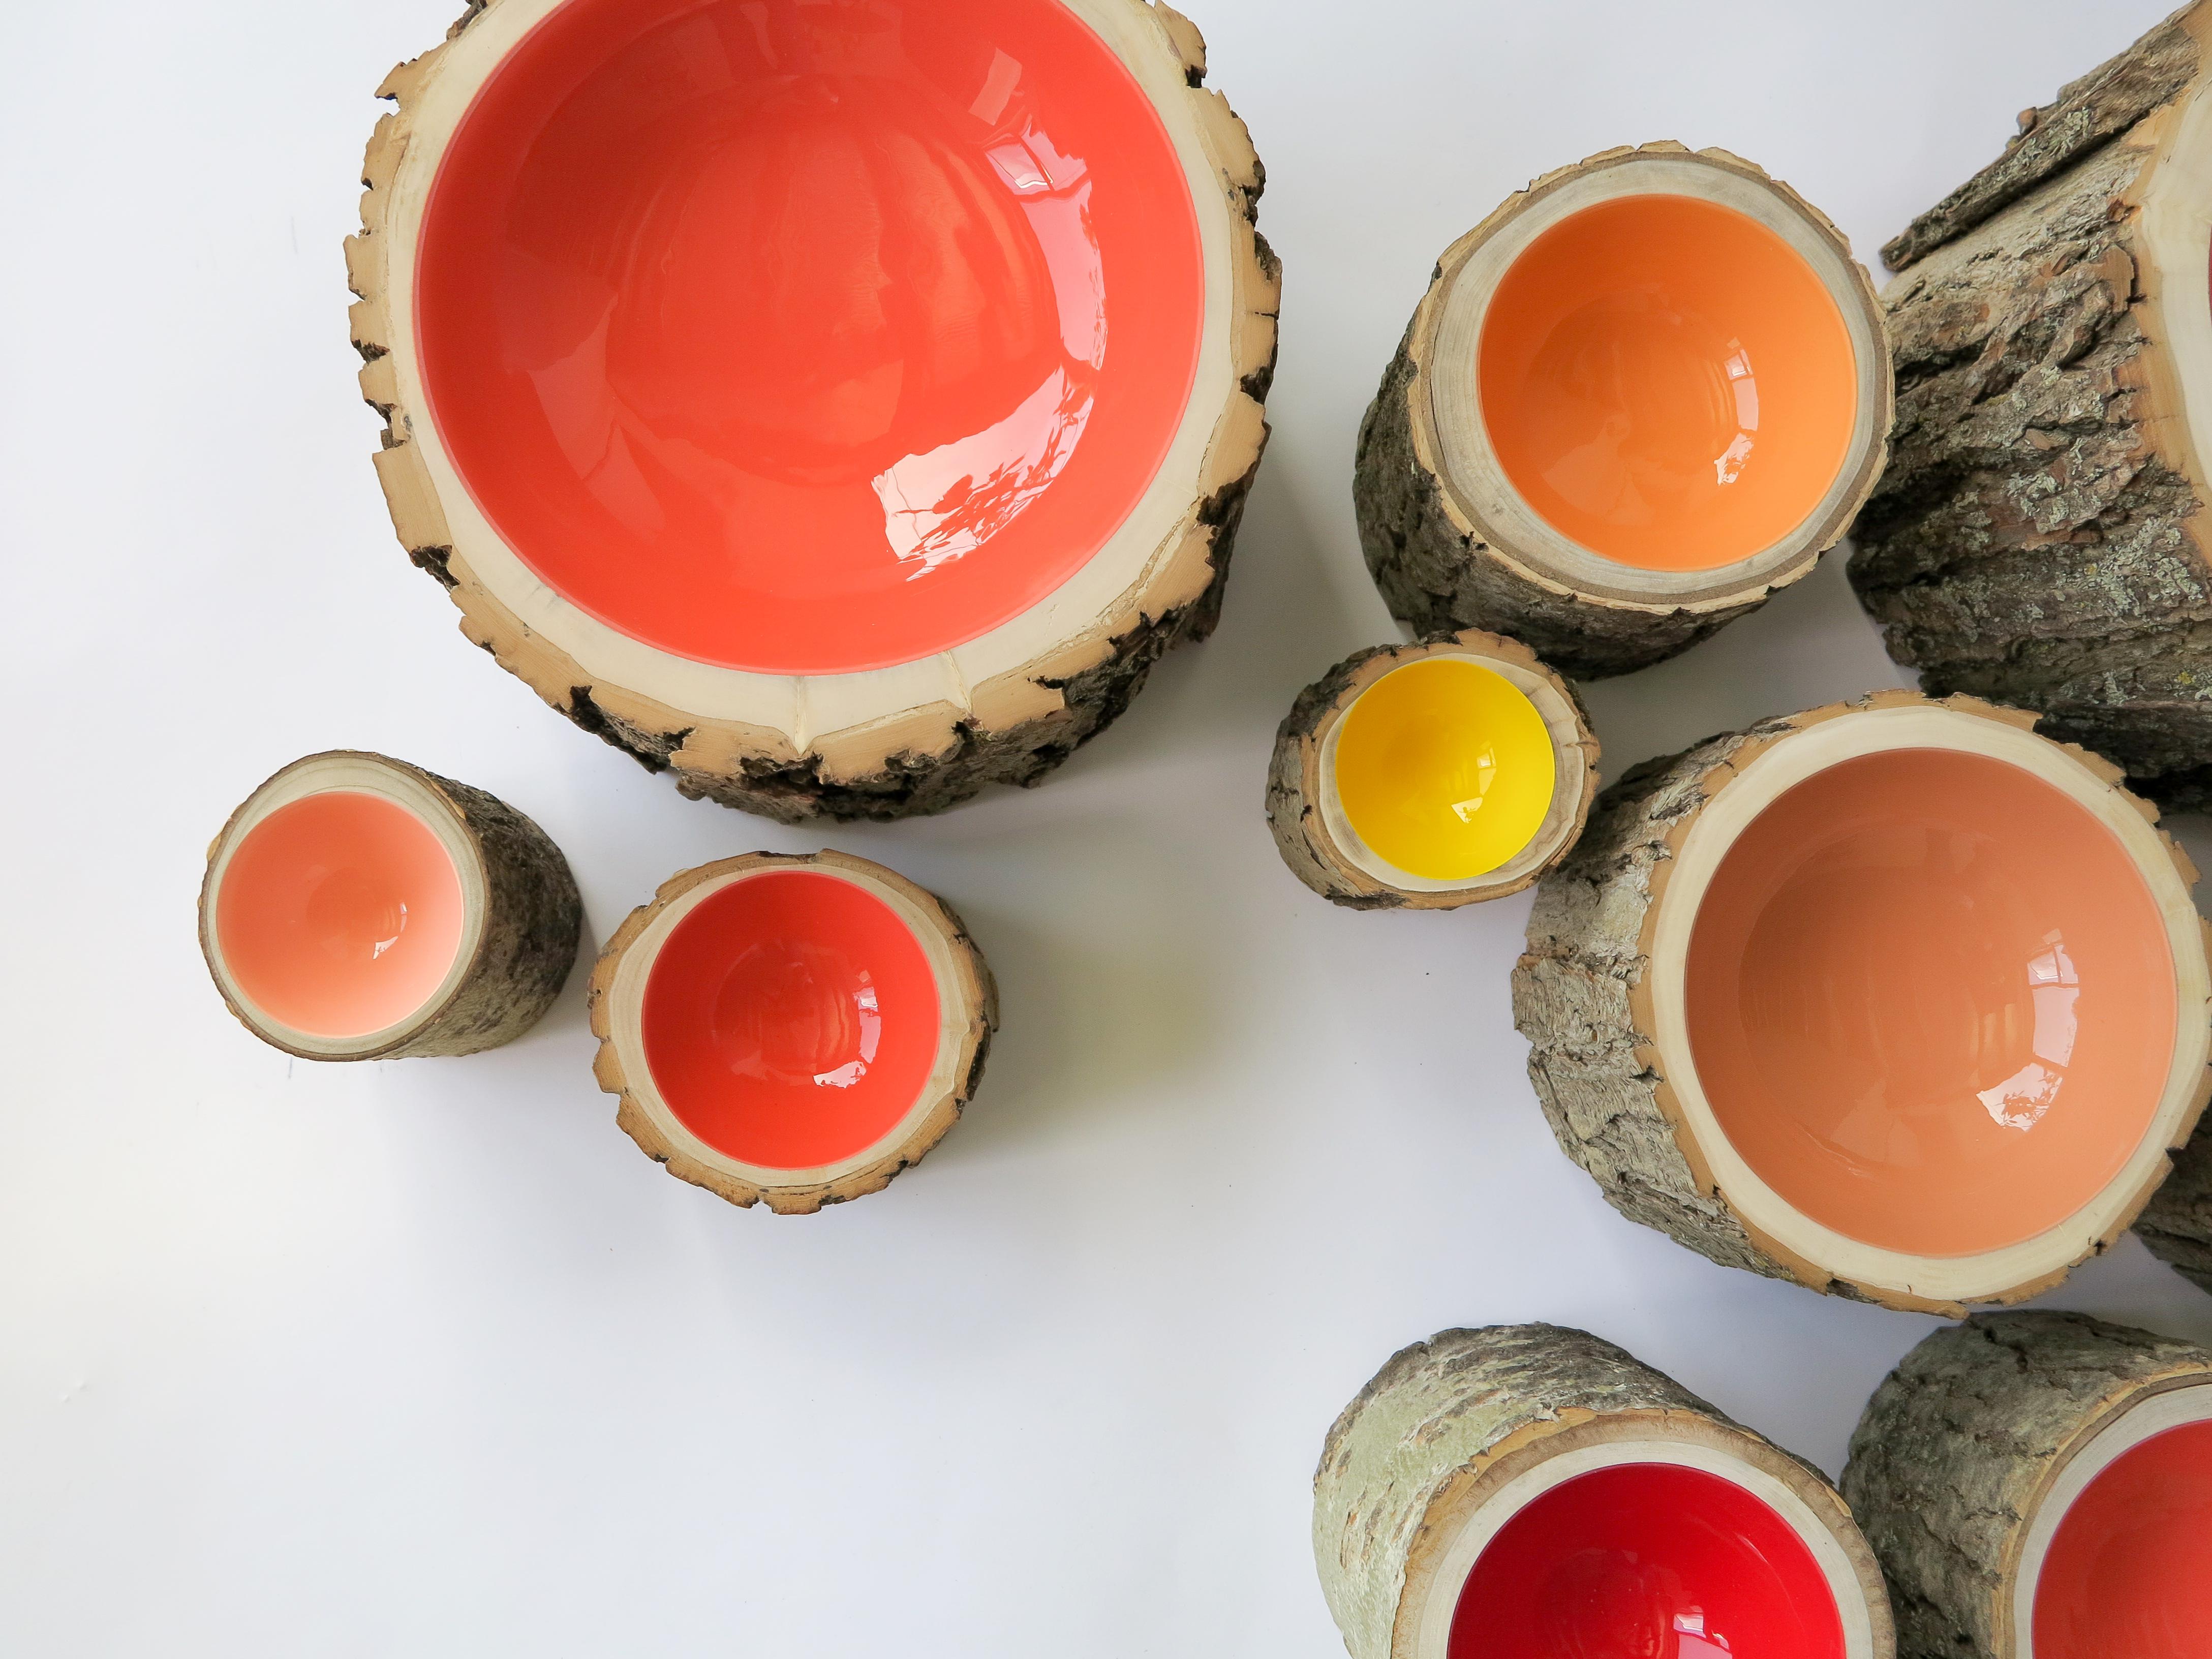 Log bowls combine the beauty of a tree in its natural state with a high-gloss, vibrant finish. Each bowl is handmade using locally reclaimed trees of all varieties (fallen or cut down due to infrastructure or inclement weather). The trees are hand